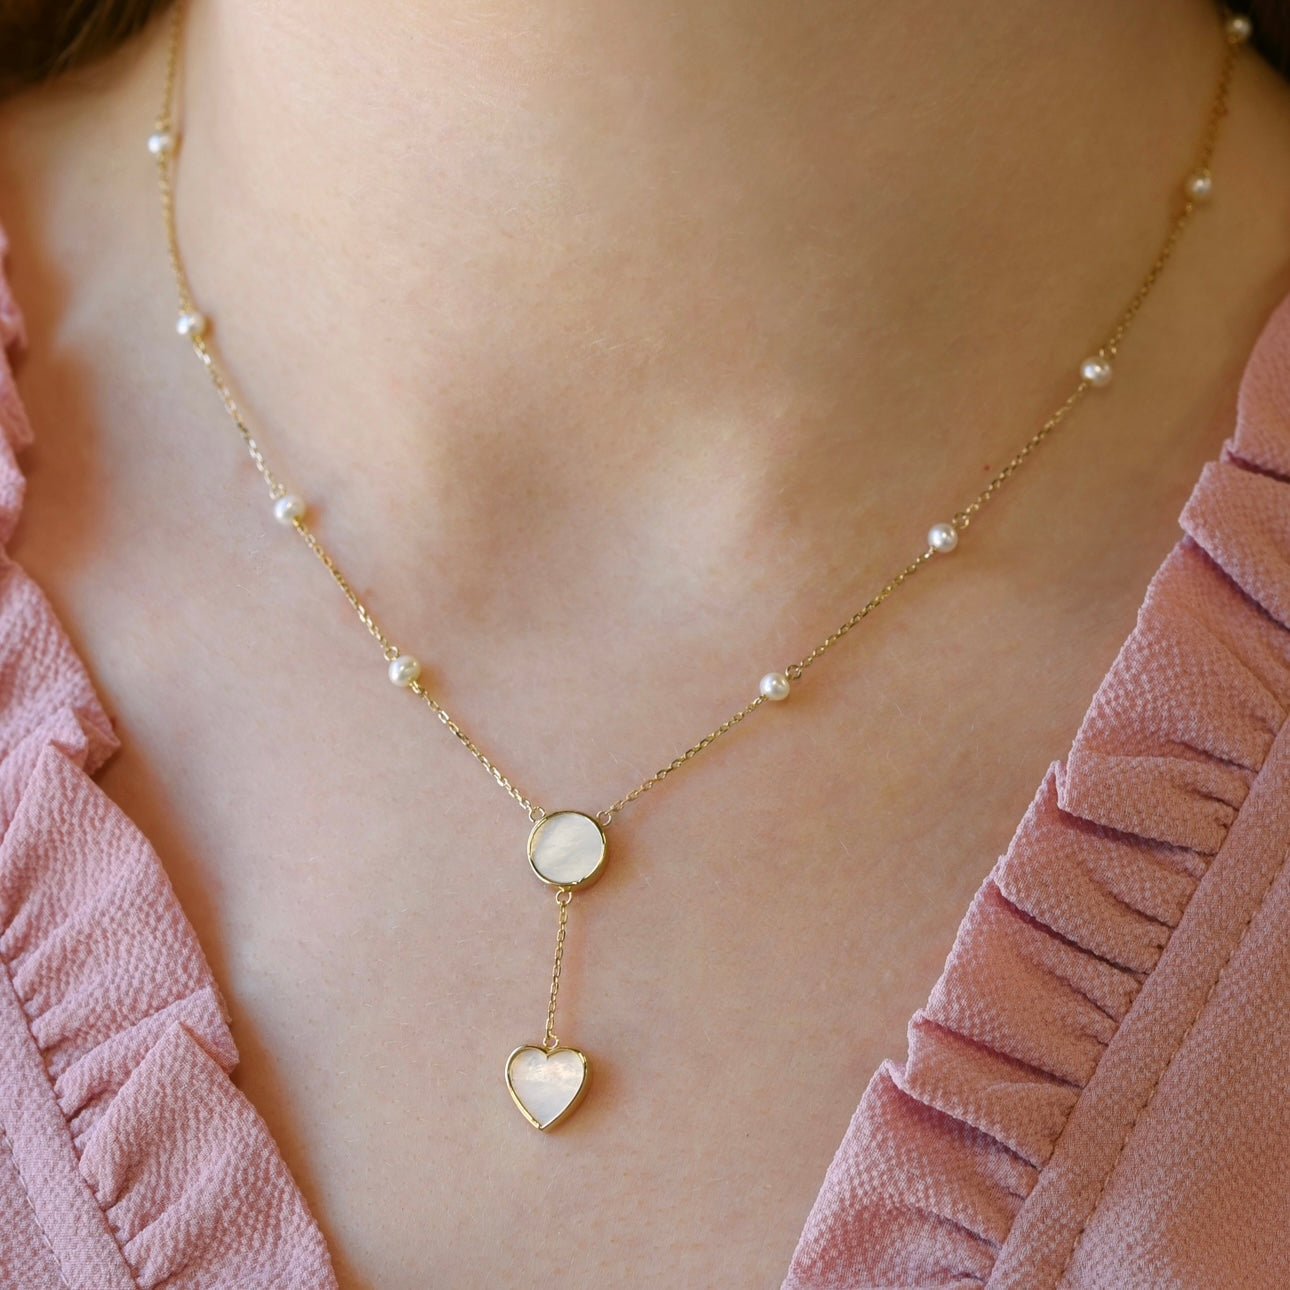 Ava Necklace in Pearl - 18k Gold - Ly